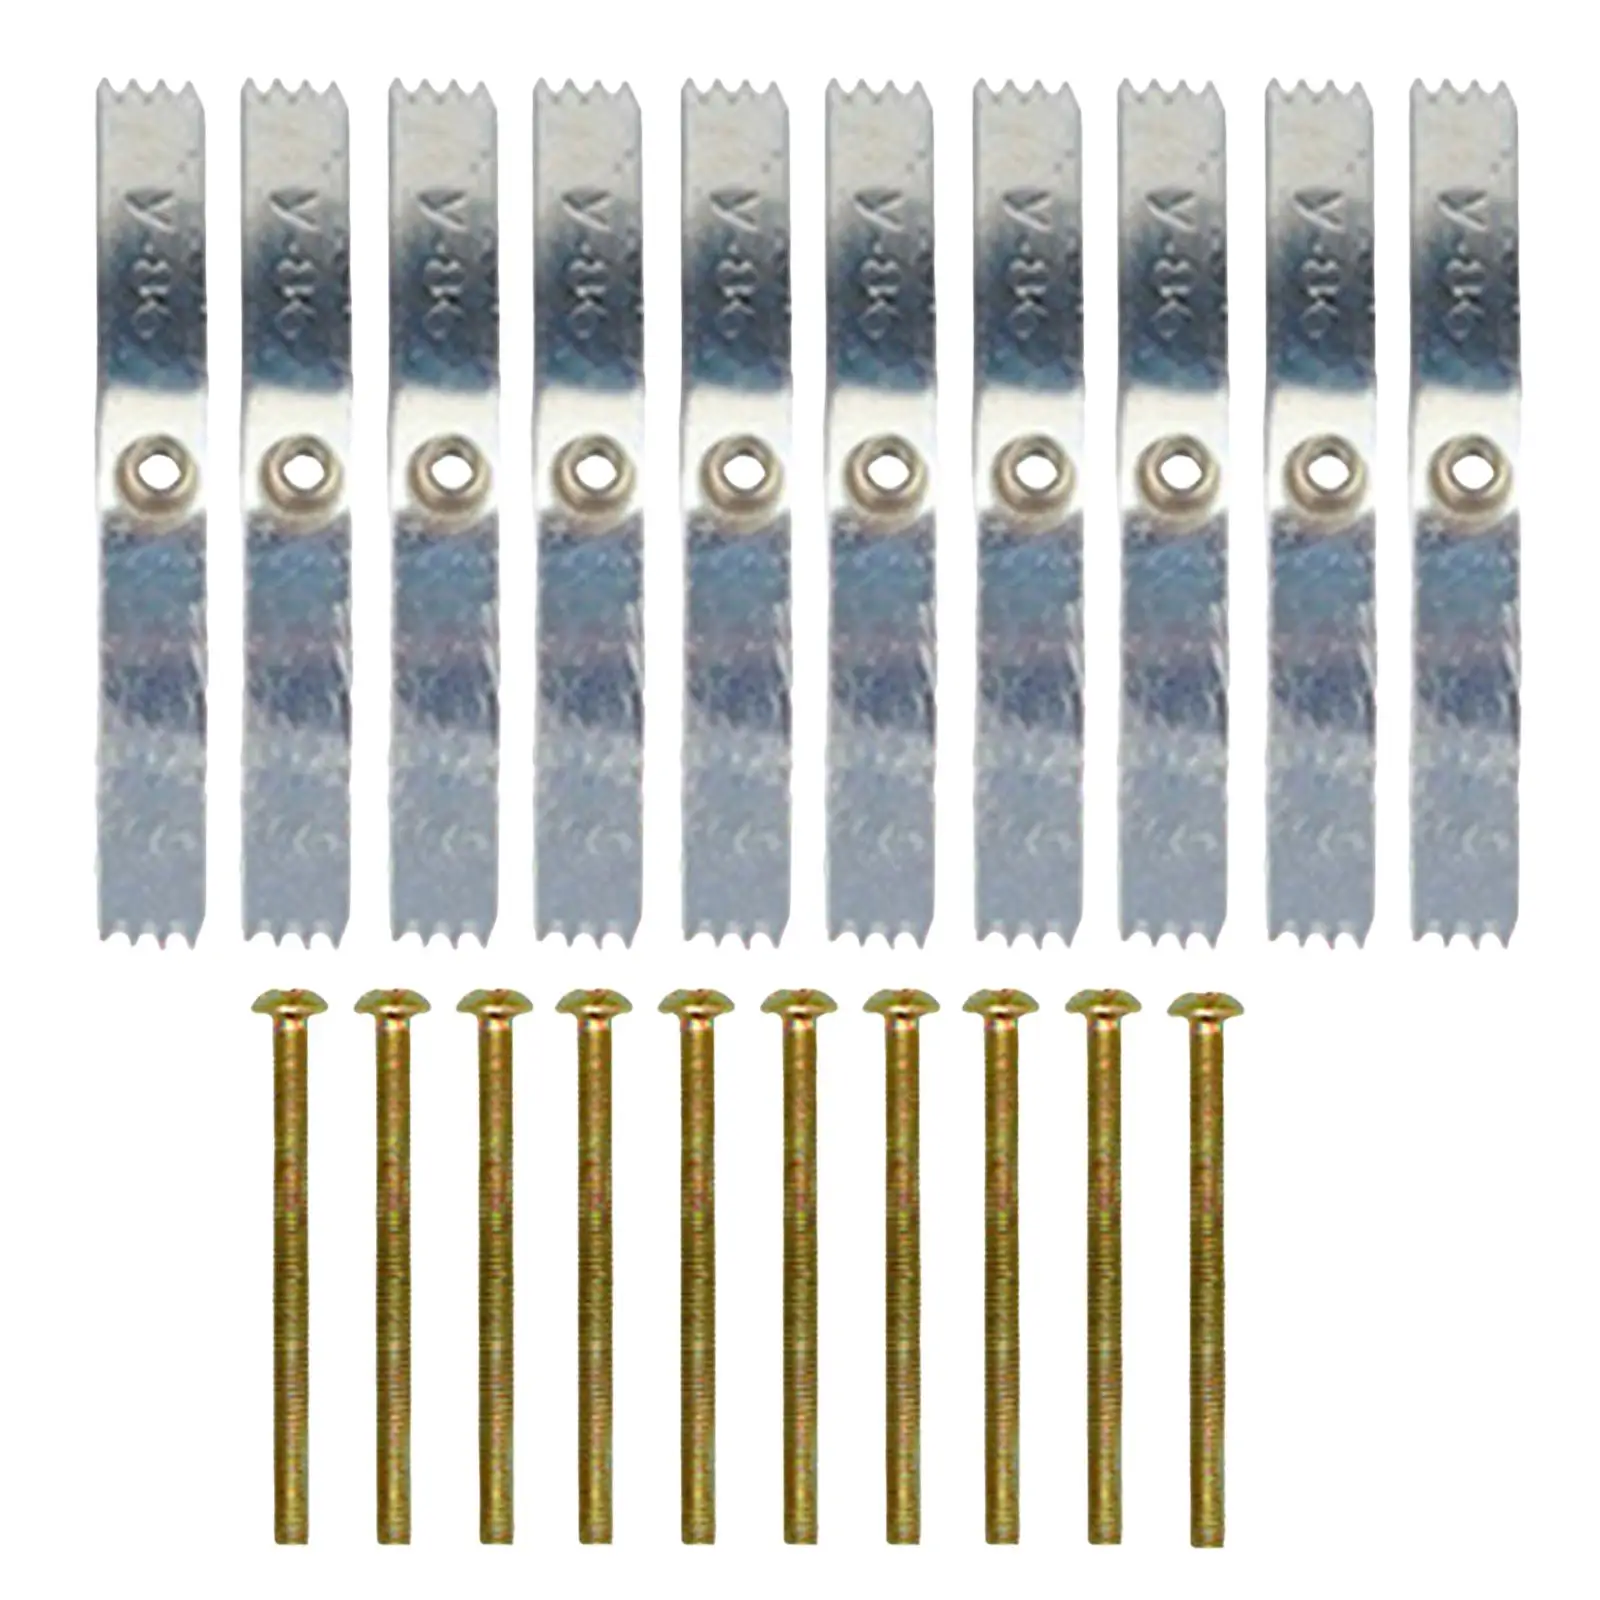 Cassette Screws Support Rod 86 Type Repair Device, Wrench Prevent Loosening Fixer for Wall Mount Switch Box Light Switch Socket